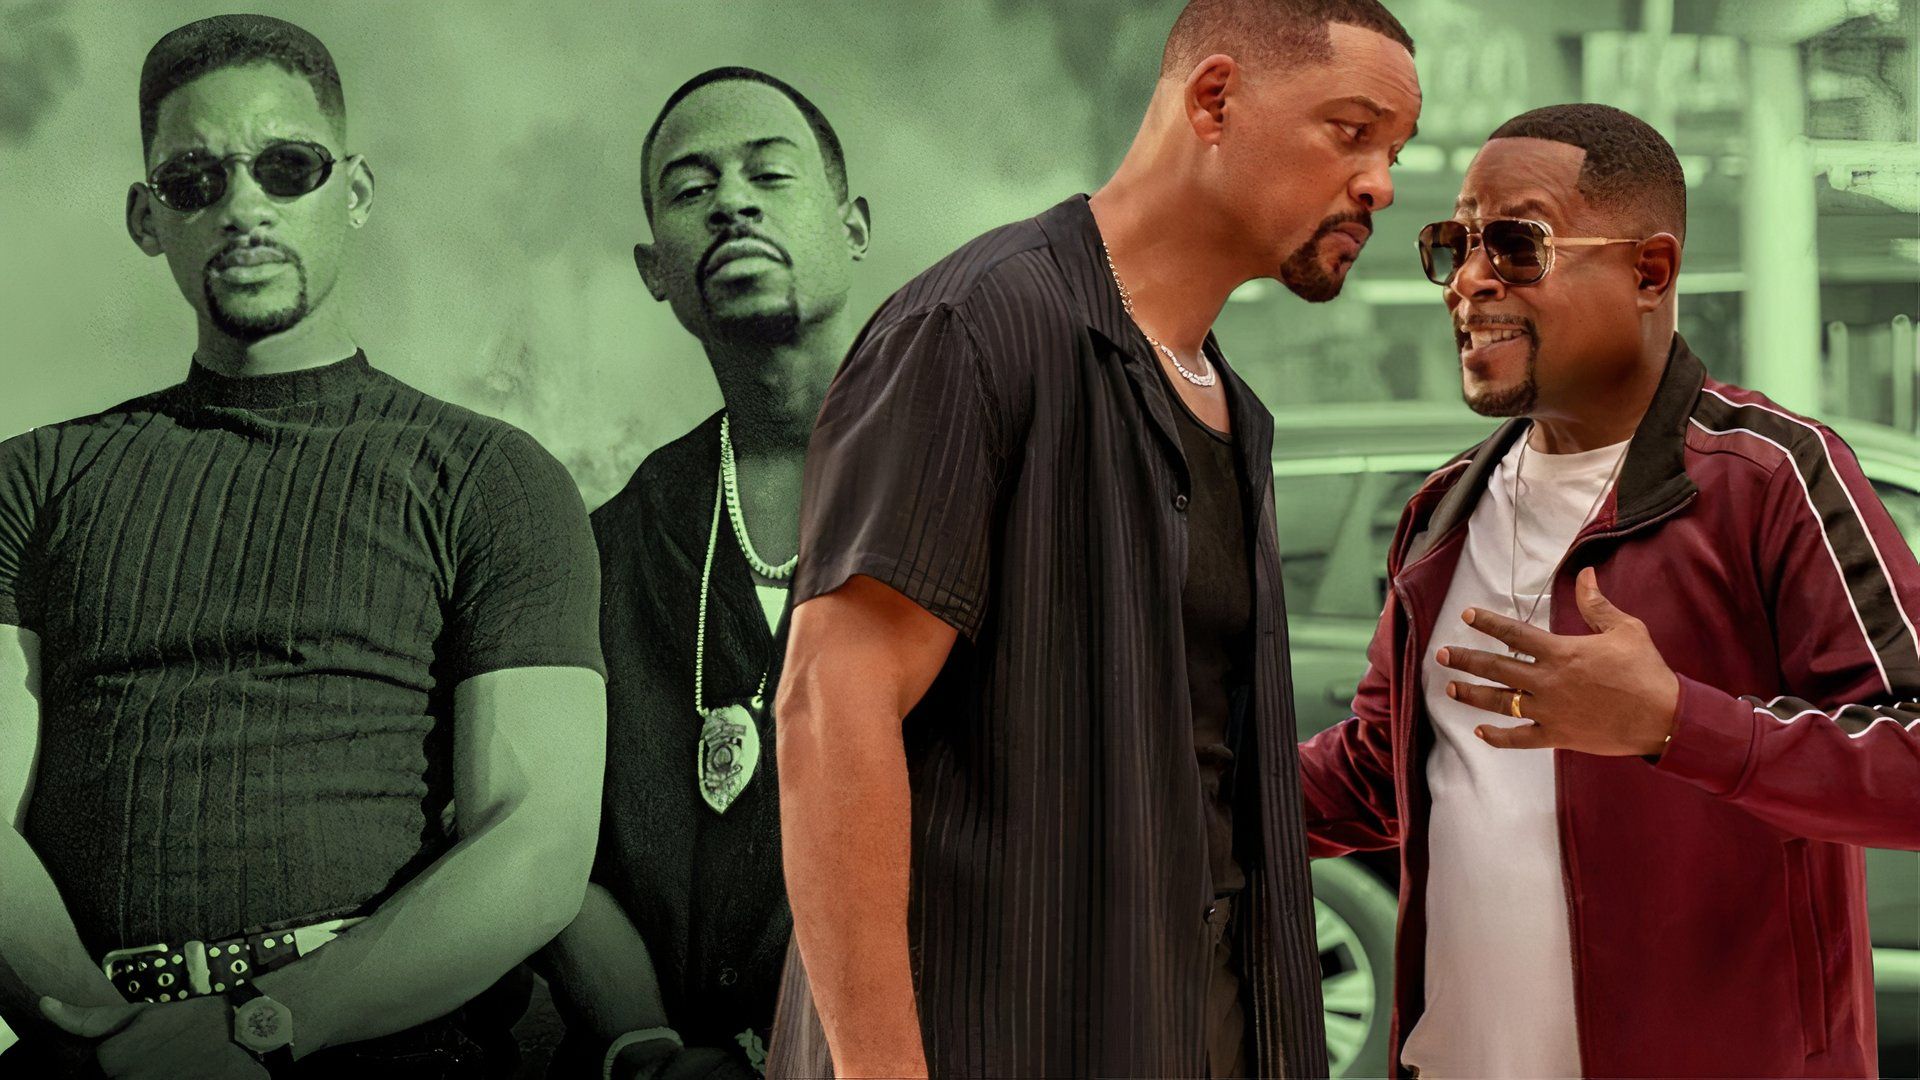 Will Smith and Martin Lawrence in an edited image of the Bad Boys franchise 